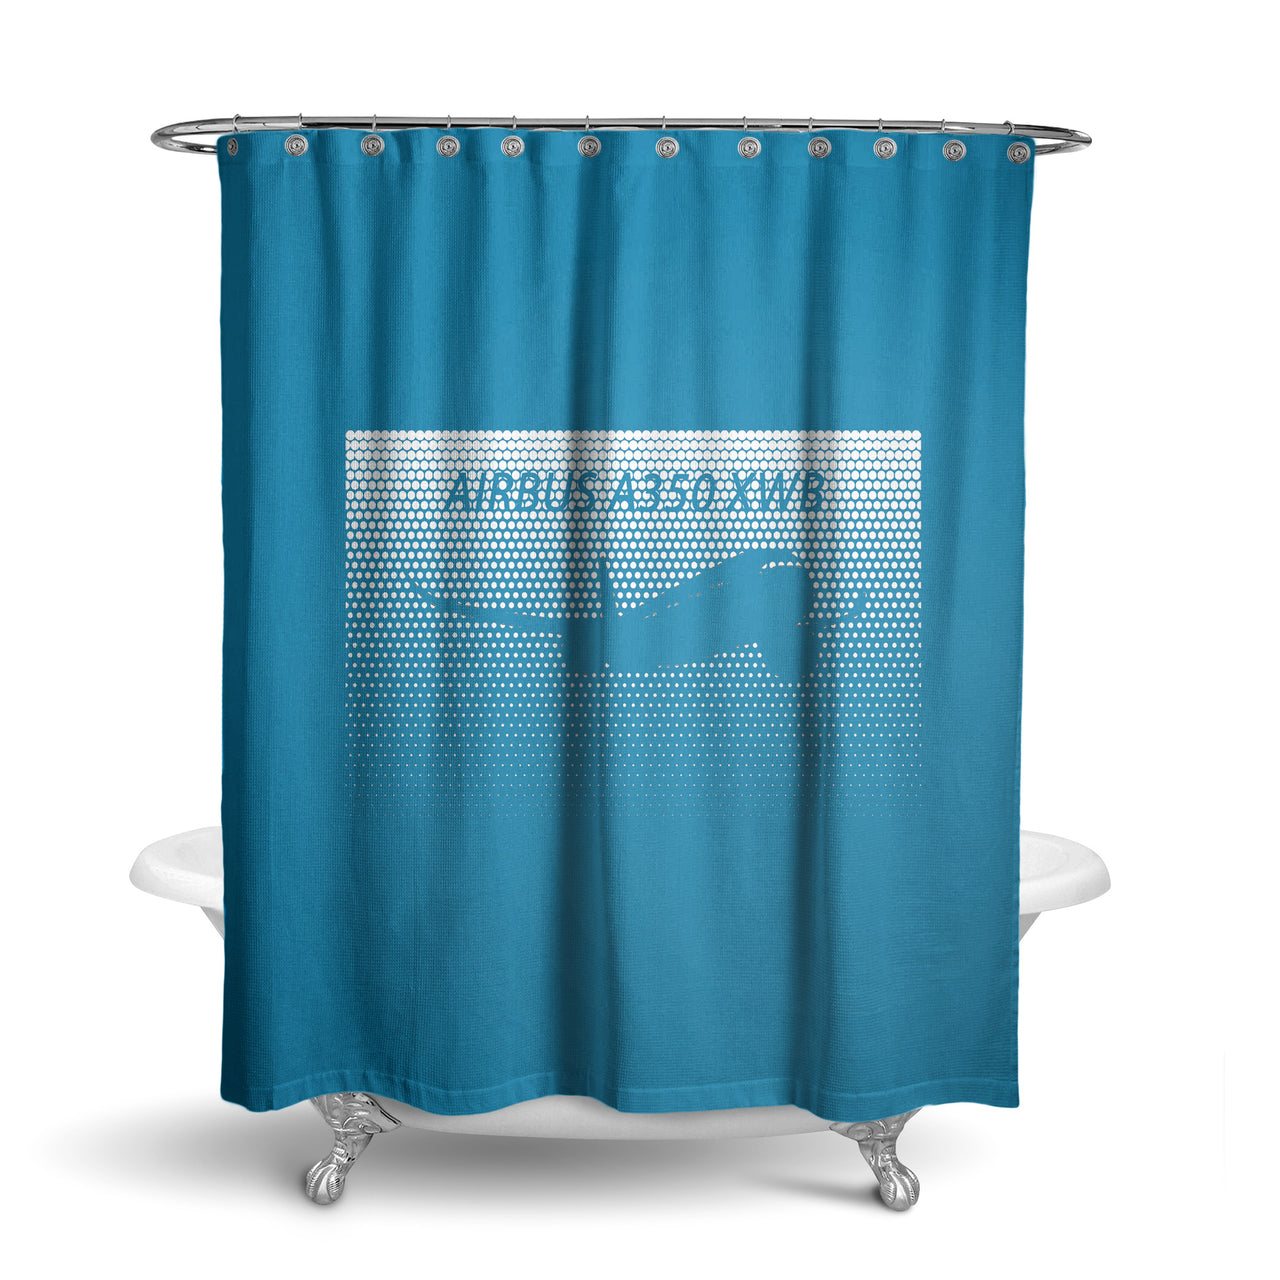 Airbus A350XWB & Dots Designed Shower Curtains